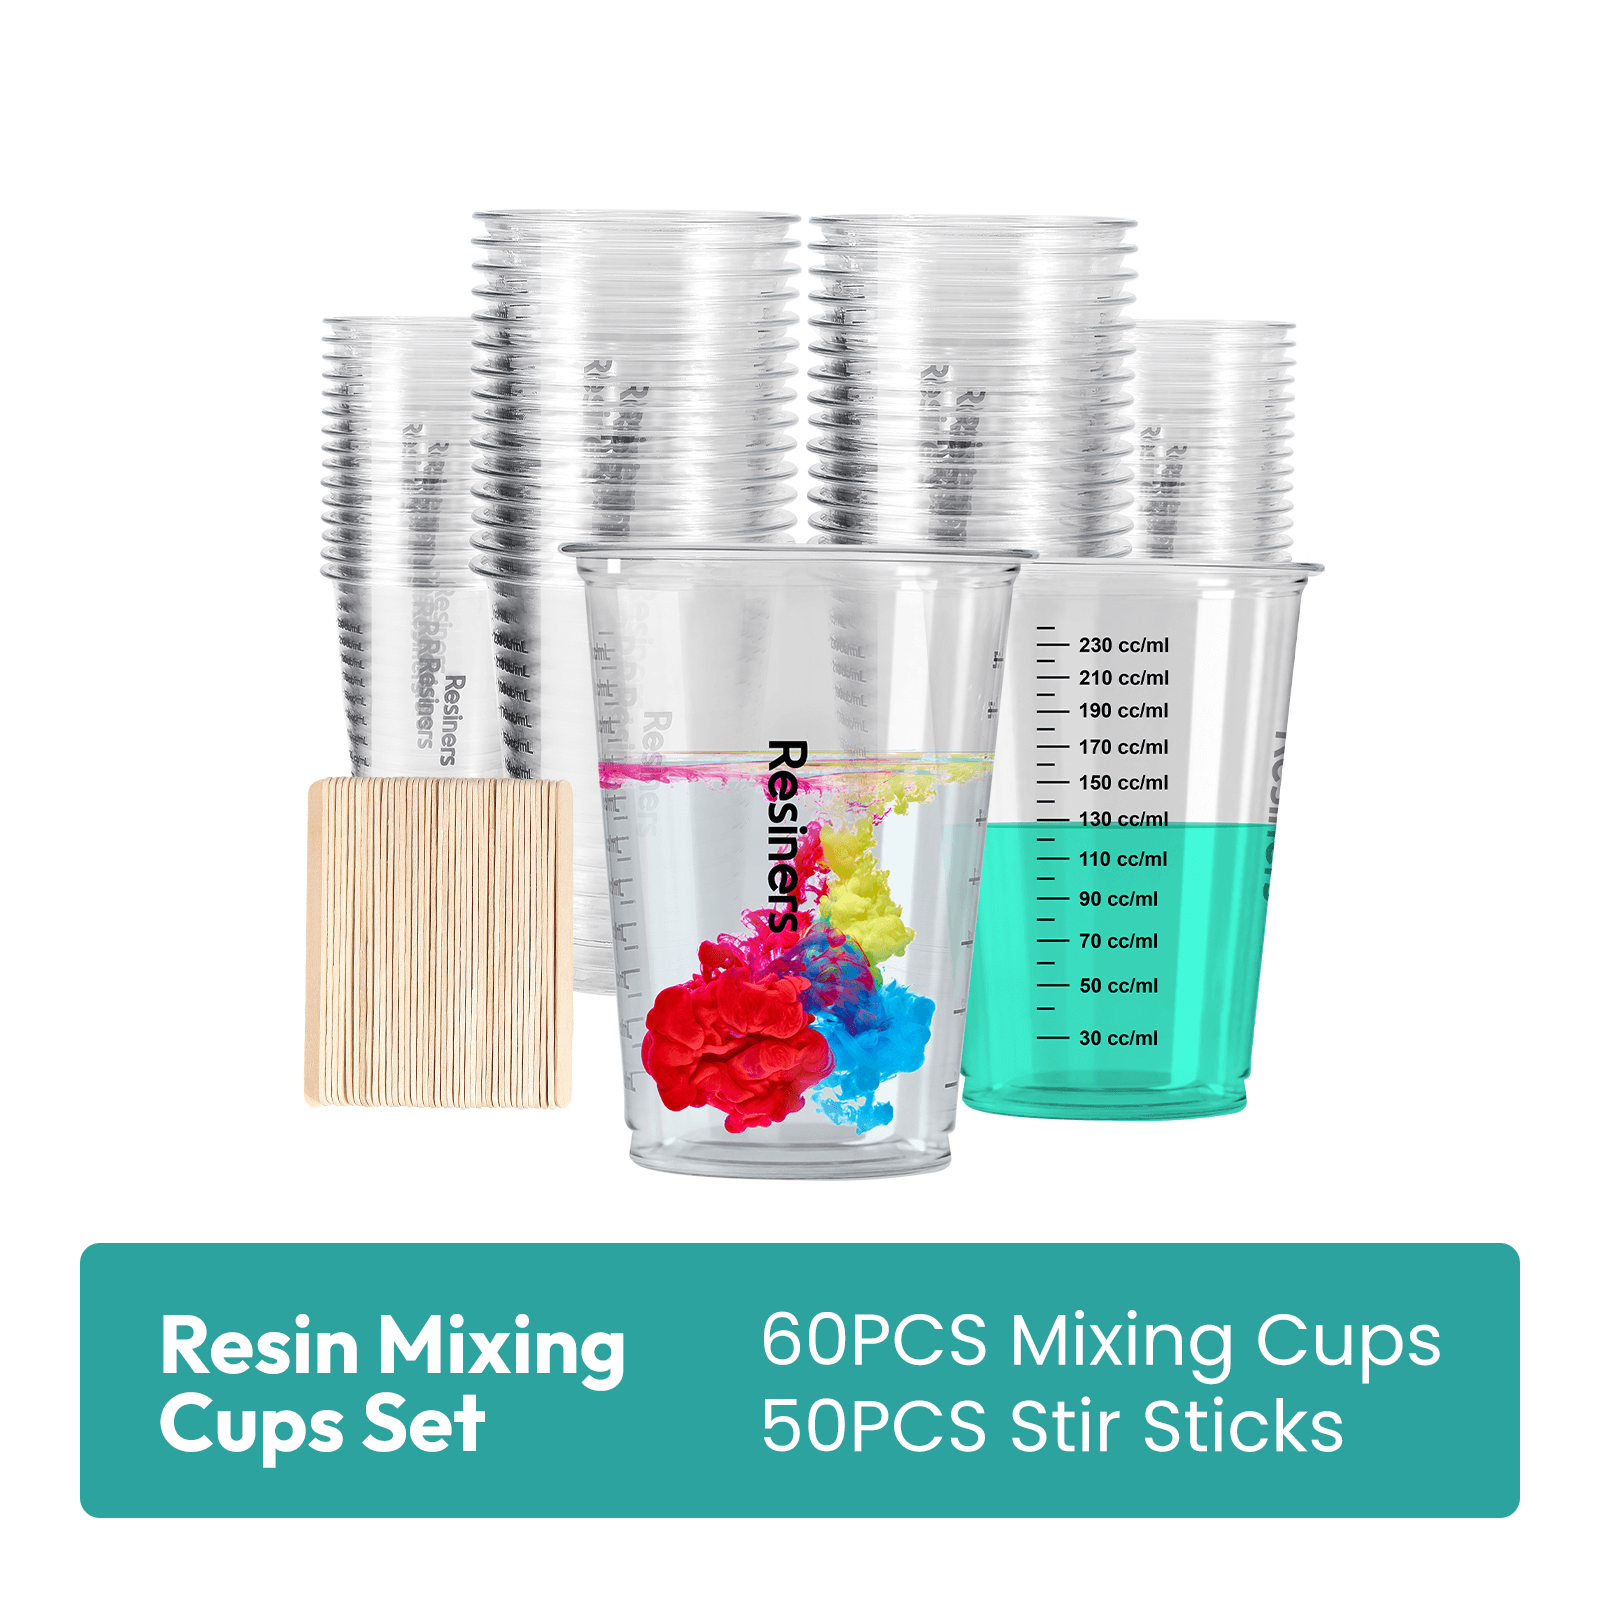  36 Pieces Silicone Resin Mixing Cups Kit- 100ml Silicone  Measuring Cups, Silicone Mixing Cups, Transfer Pipettes, Finger Cots,  Silicone Stir Stick and Silicone Mat for Art Making Handmade Craft : Arts